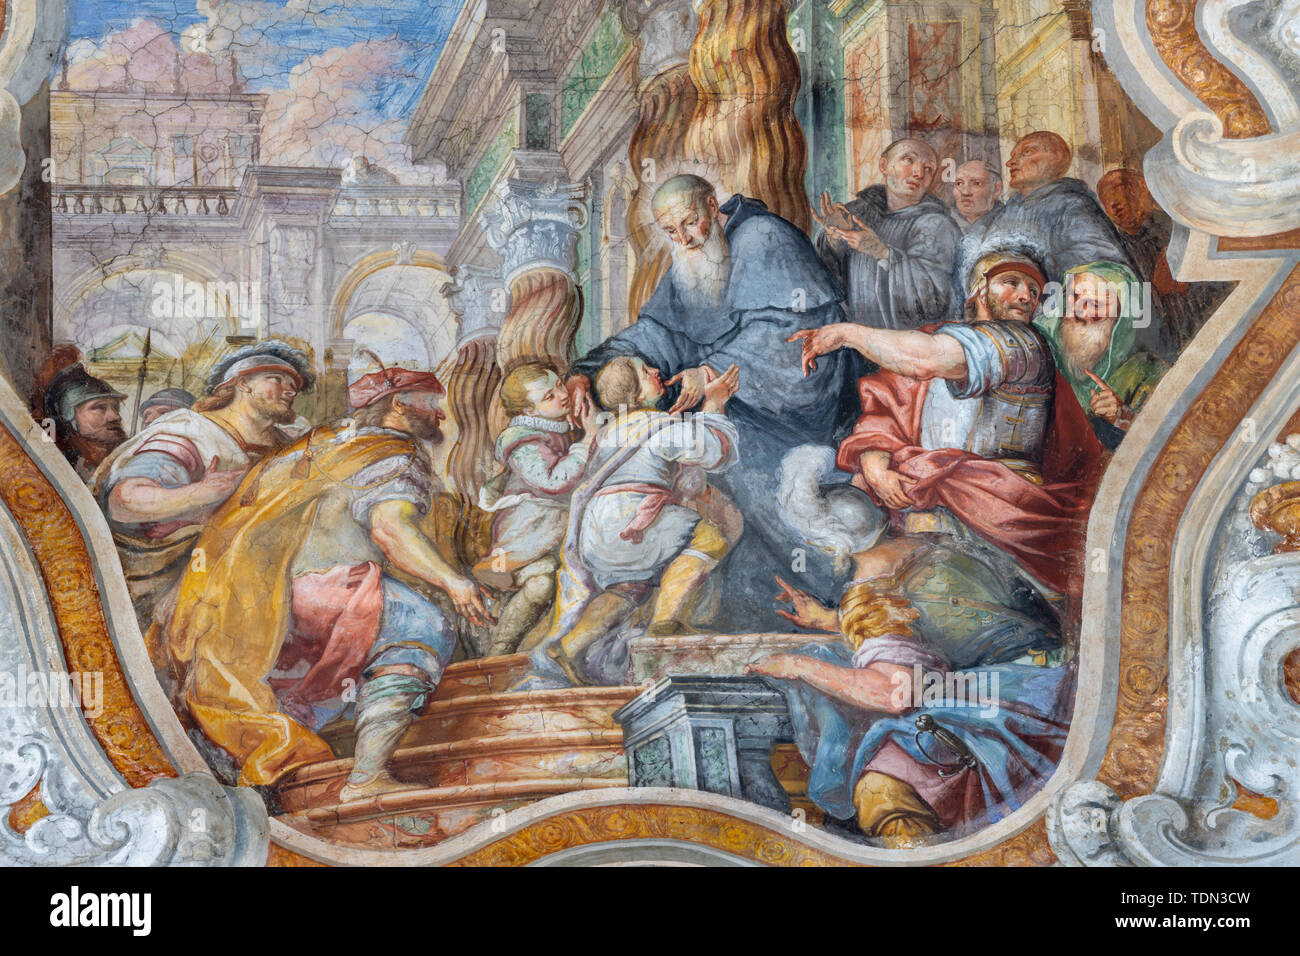 CATANIA, ITALY - APRIL 7, 2018: The vault fresco from live of Saint Benedict in church Chiesa di San Benedetto by Giovanni Tuccari (1667–1743). Stock Photo